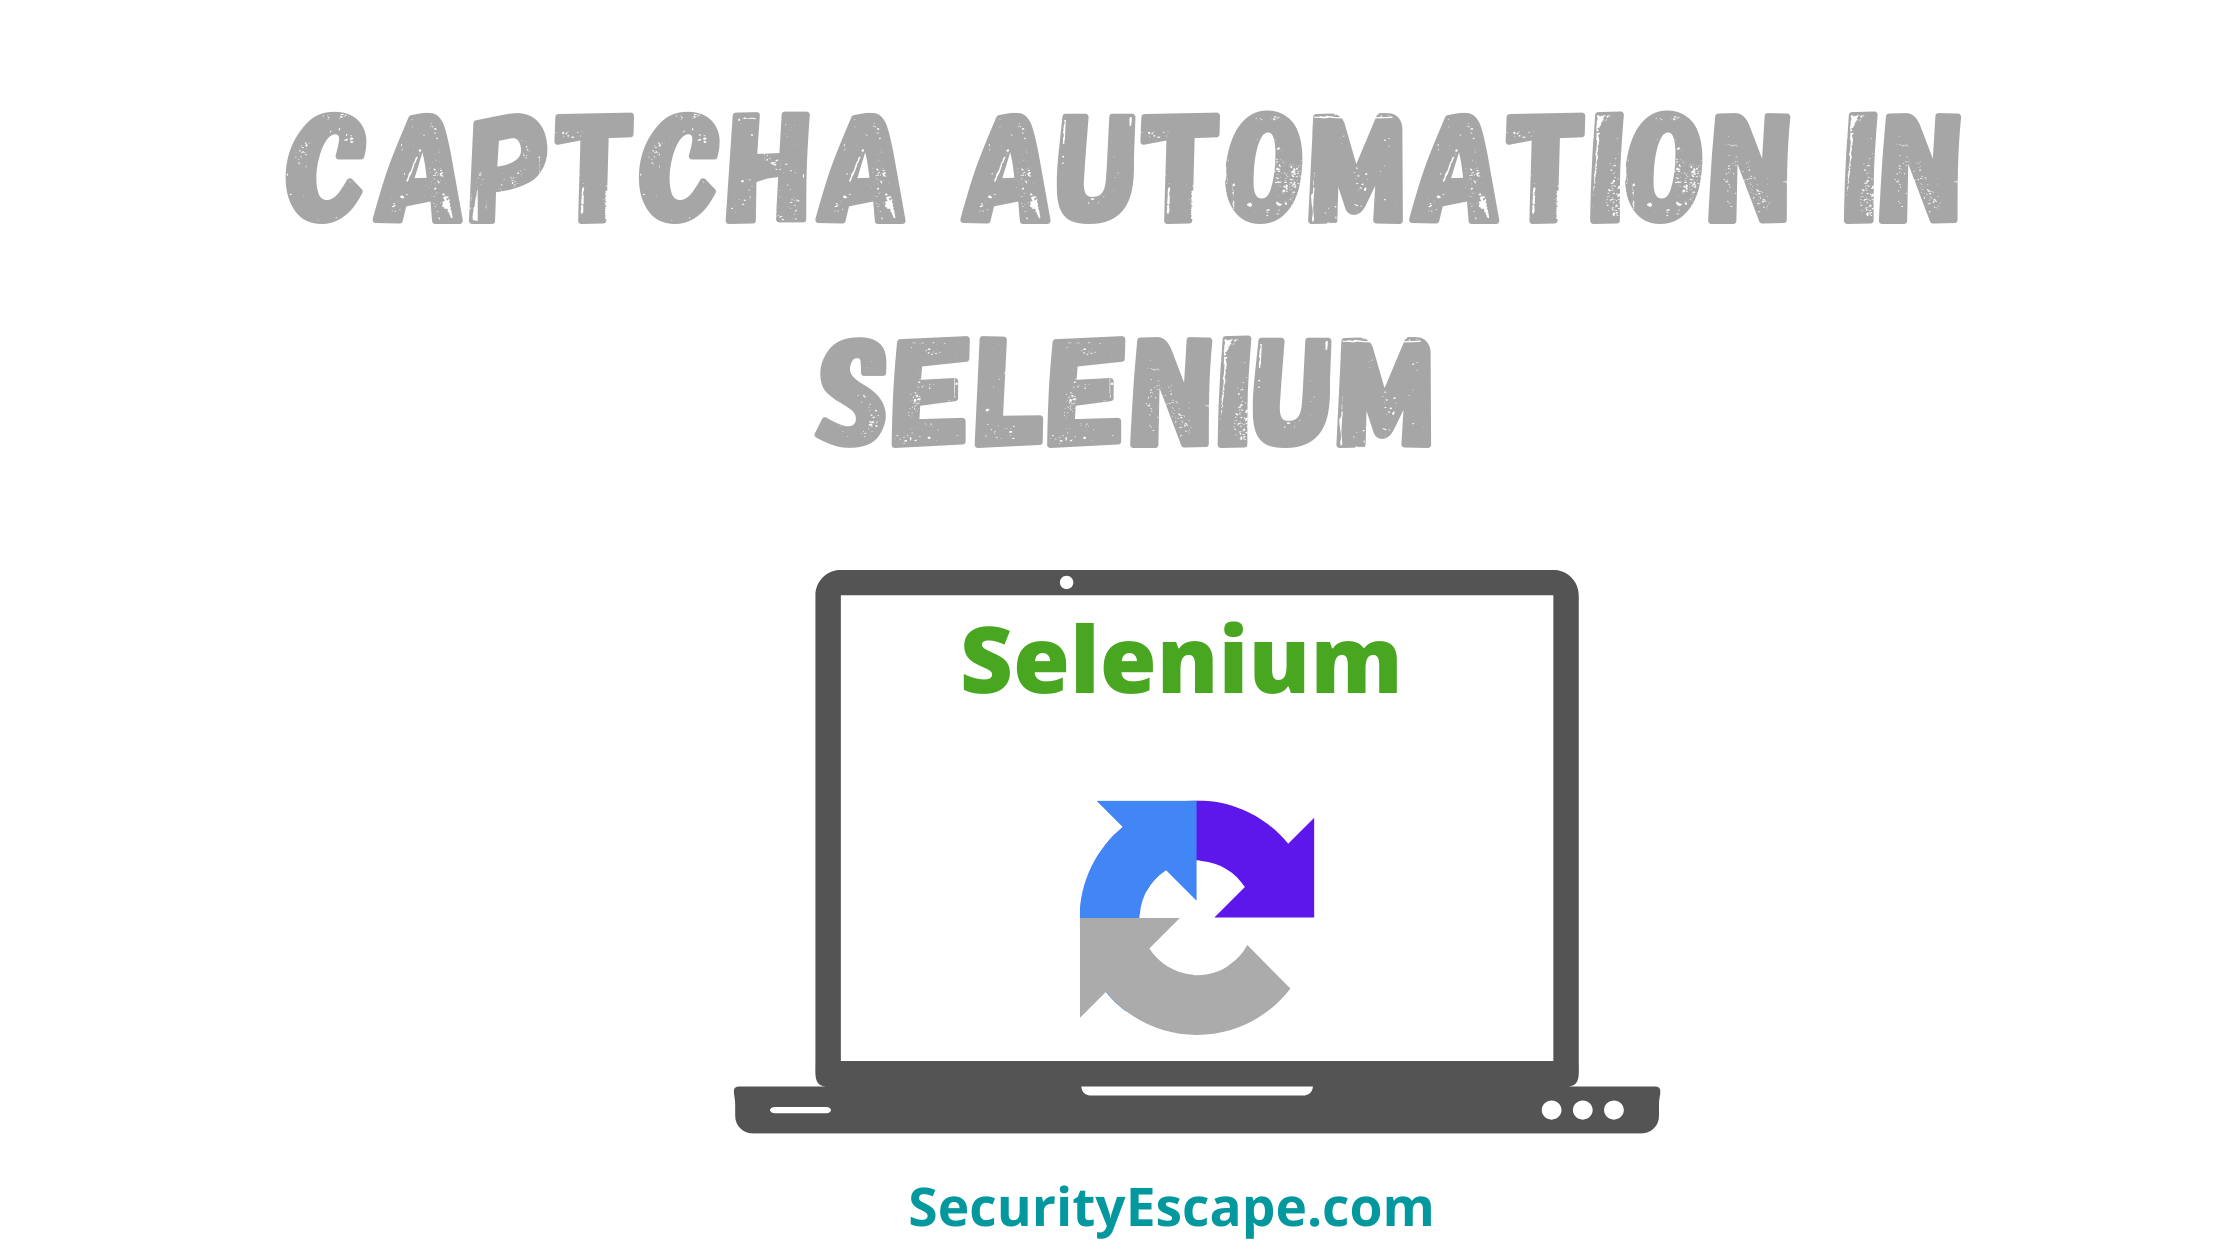 Can captcha be automated in Selenium